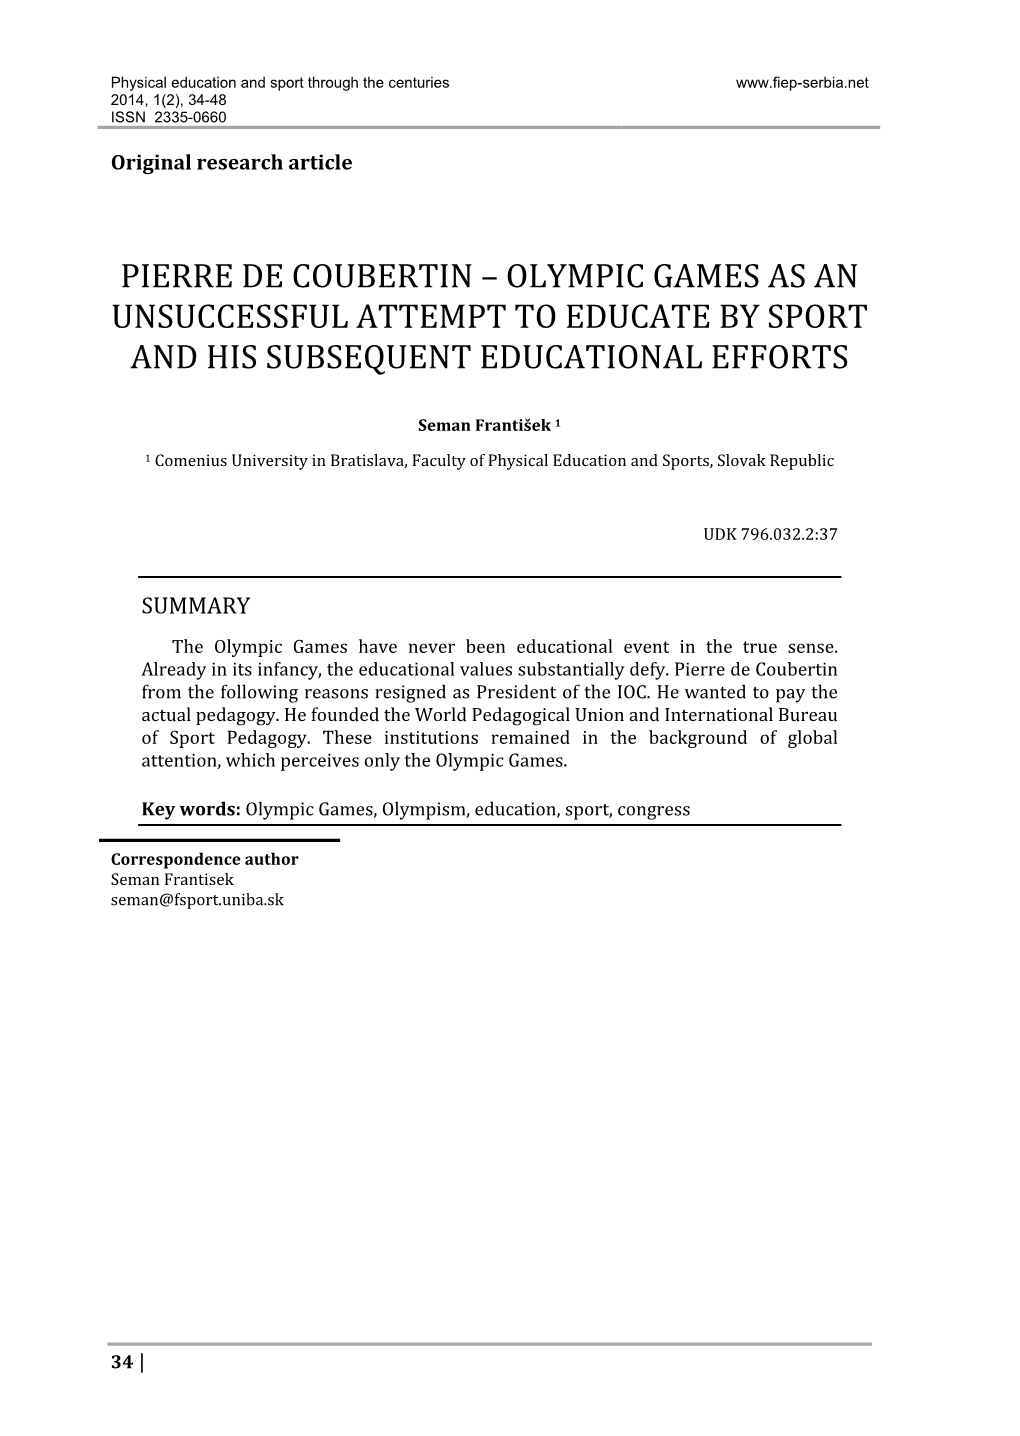 Pierre De Coubertin – Olympic Games As an Unsuccessful Attempt to Educate by Sport and His Subsequent Educational Efforts